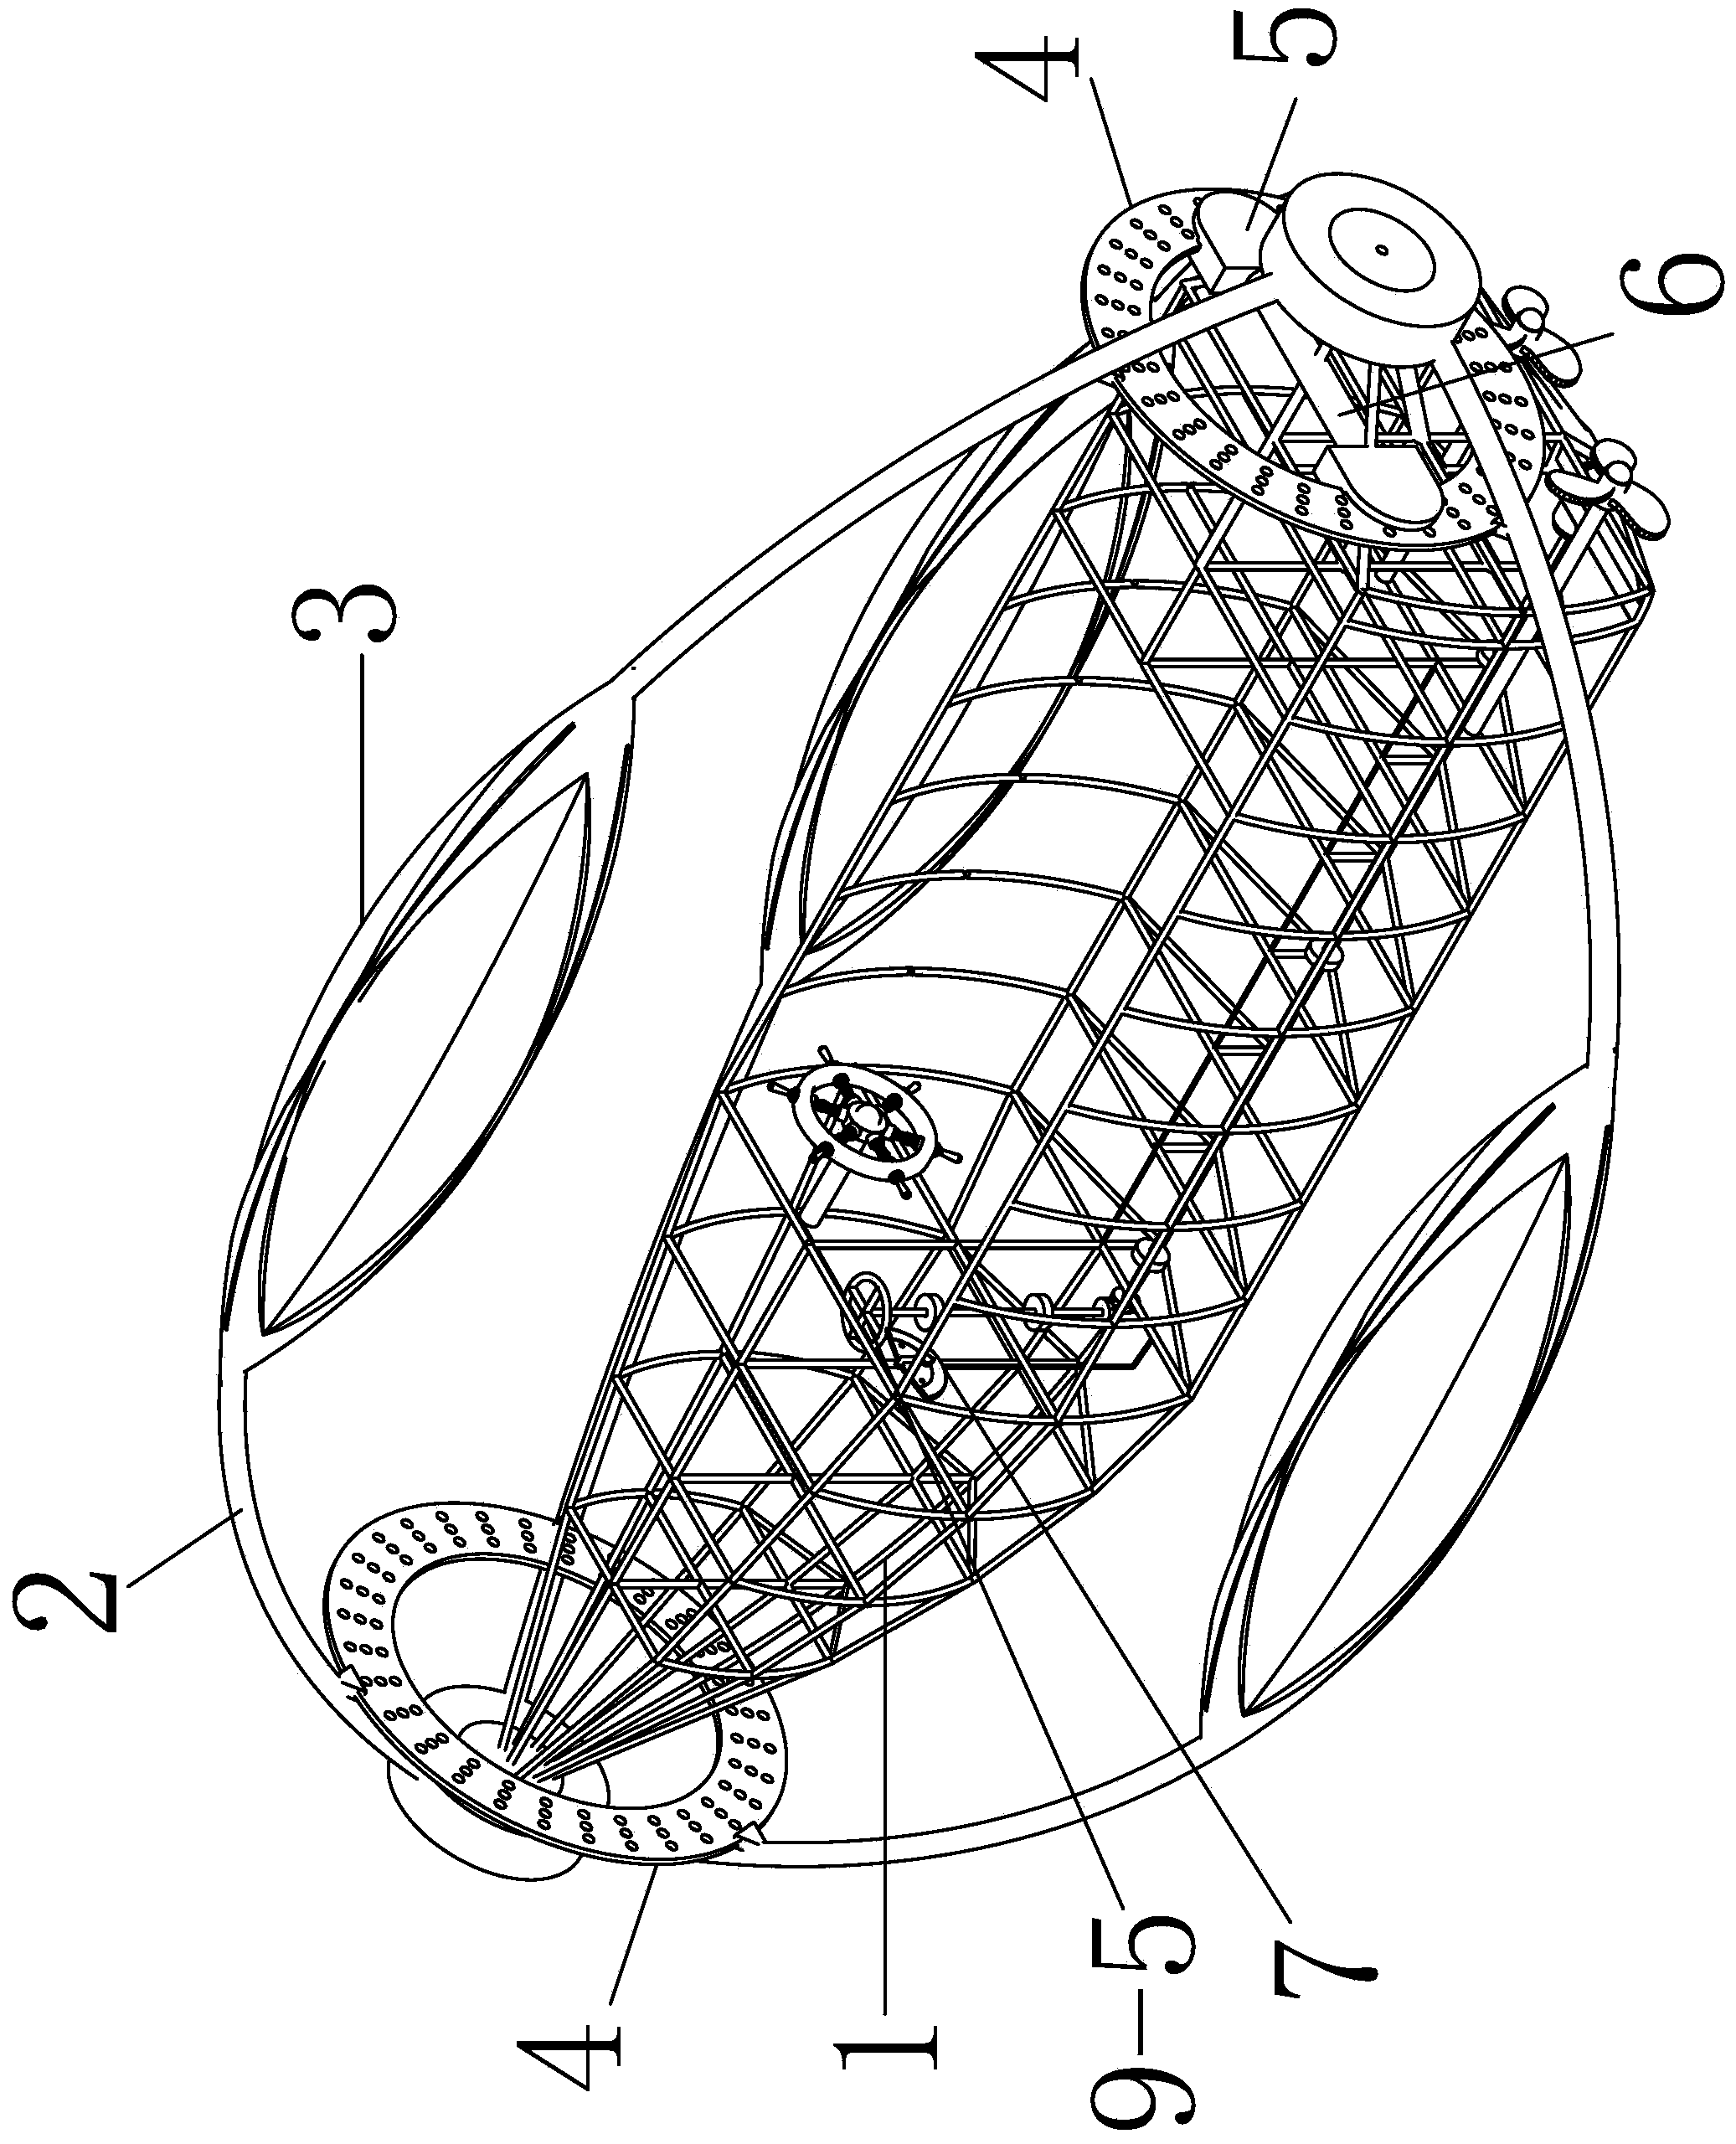 Non-capsizable ship with triangle auxiliary floating body